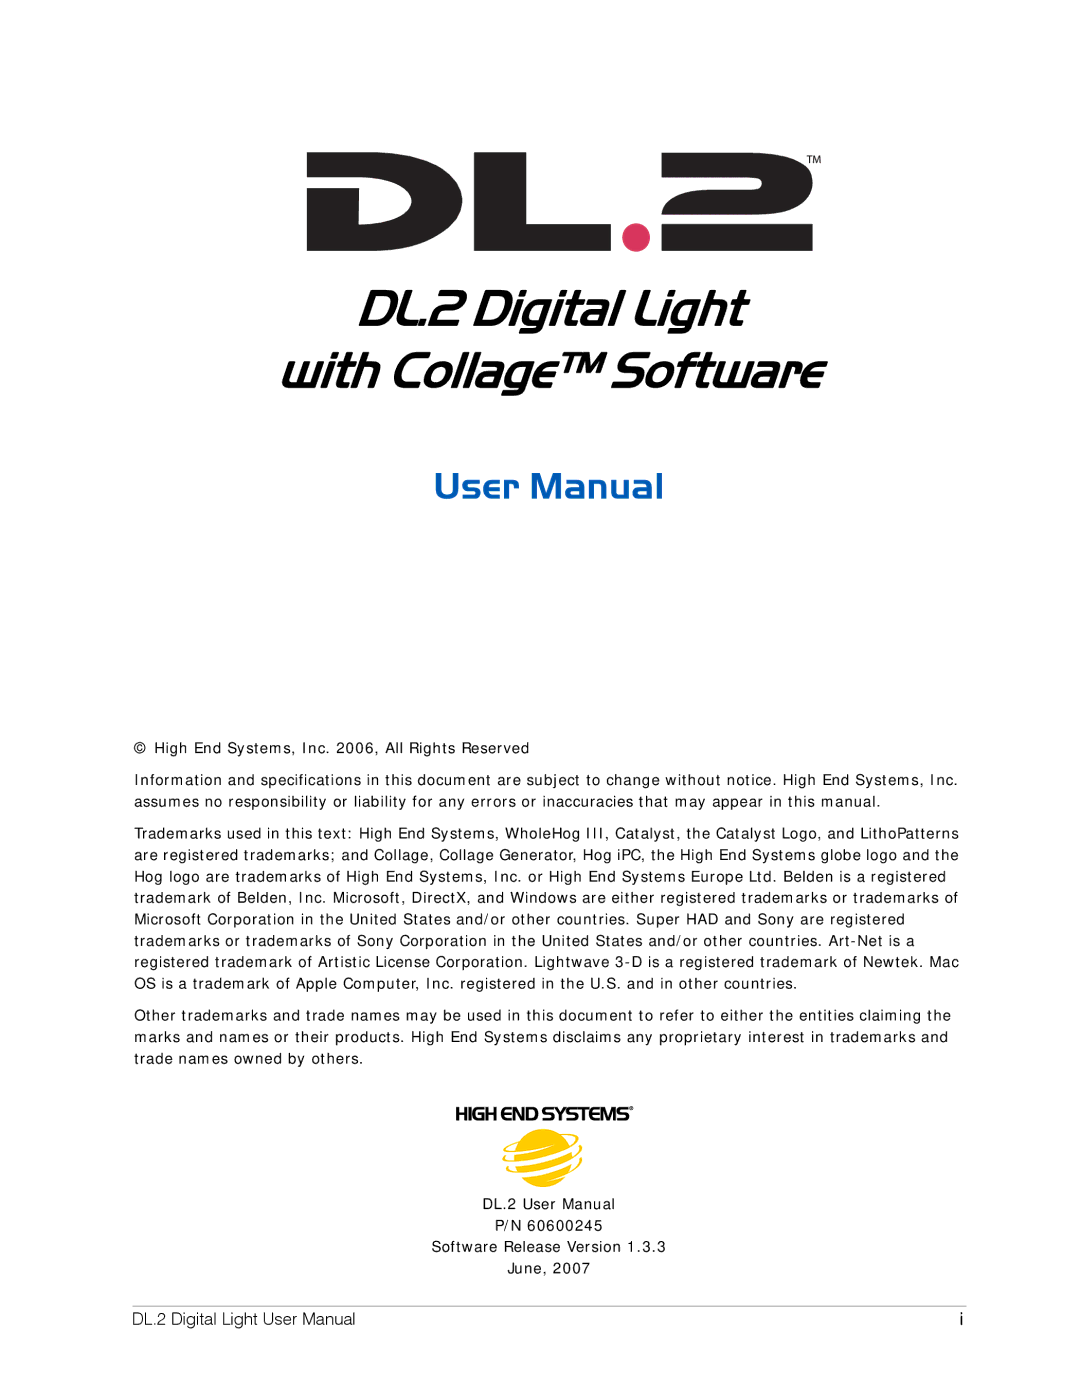 High End Systems user manual DL.2 Digital Light With Collage Software 